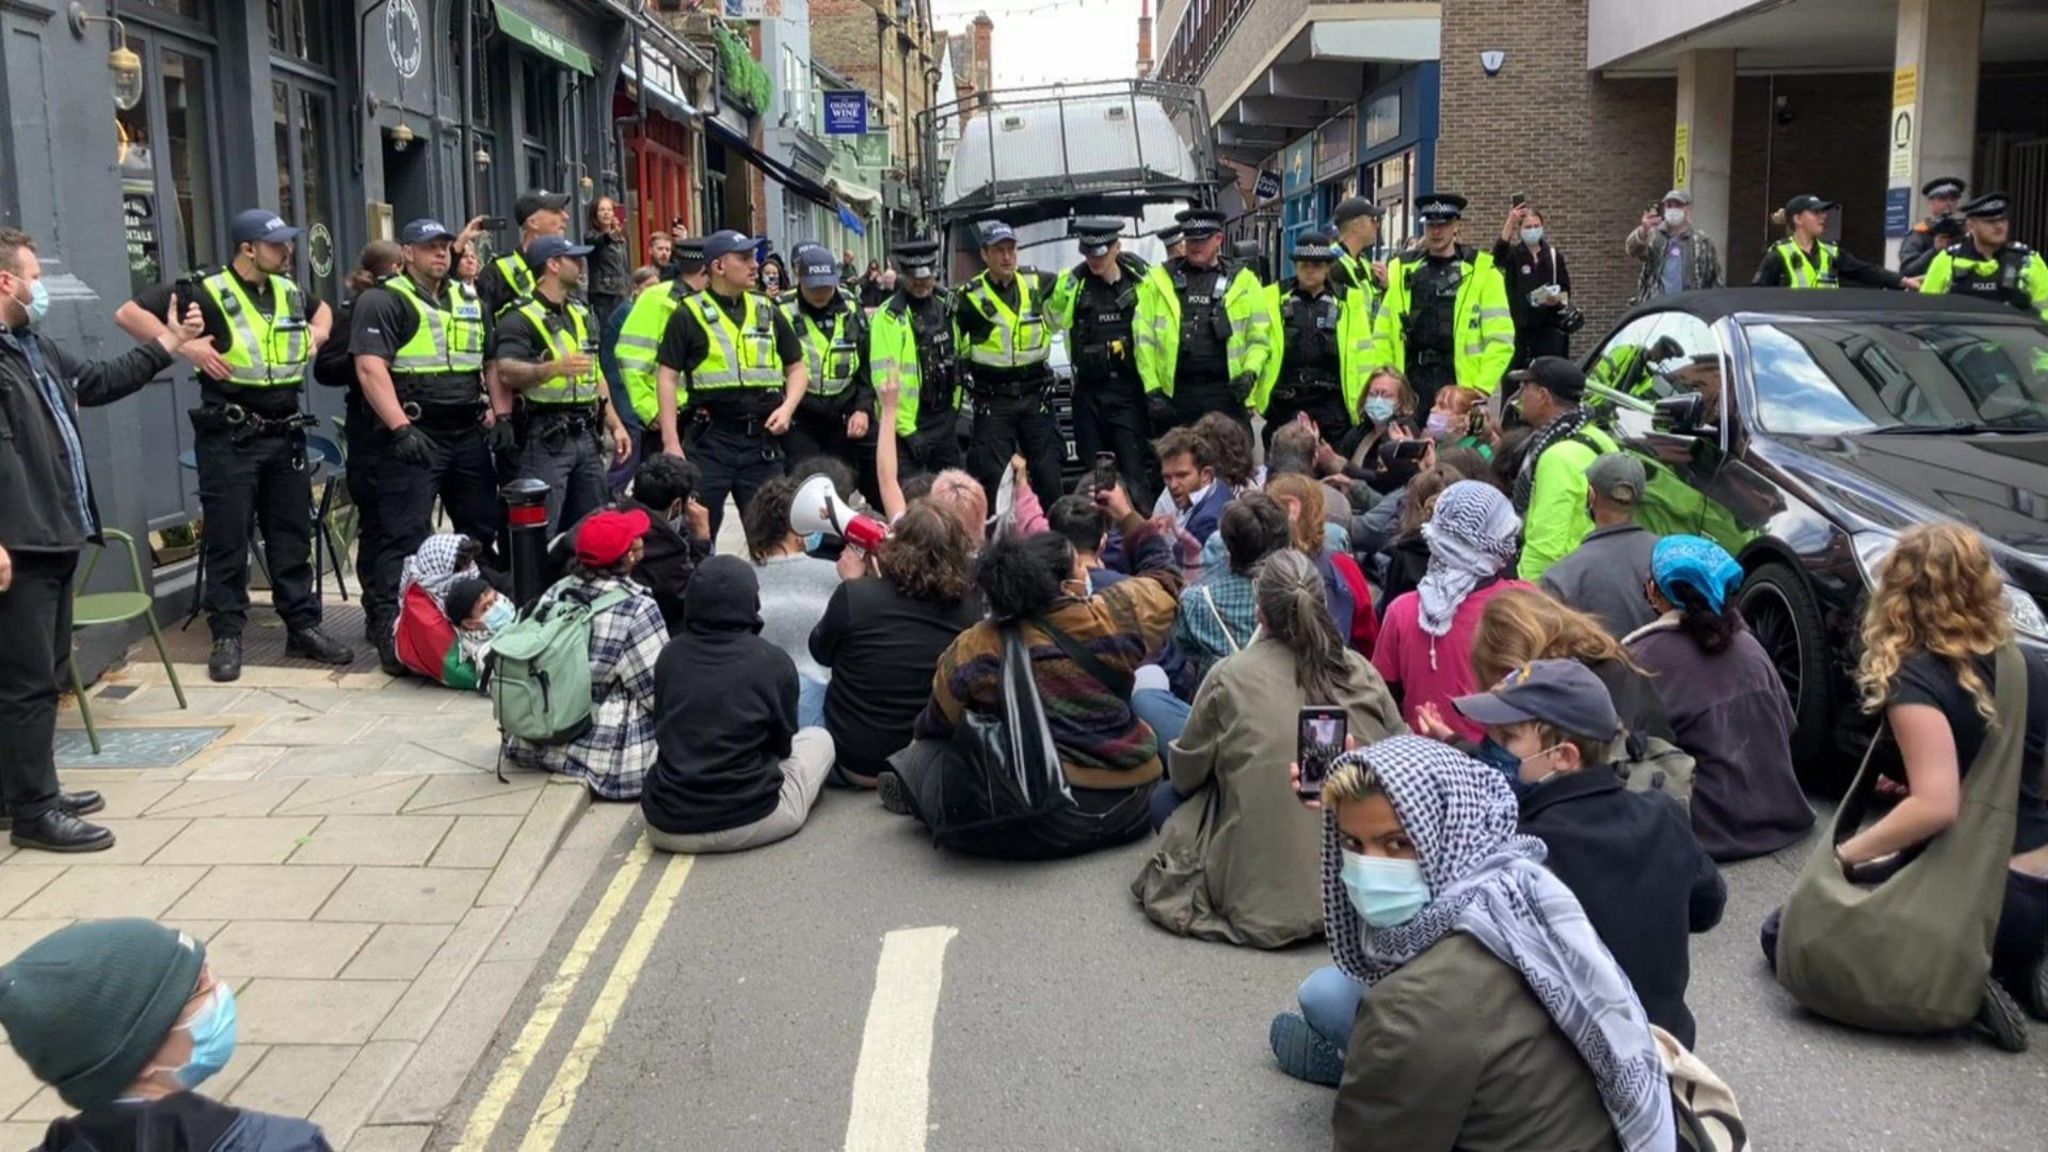 People sitting on the street in front of police